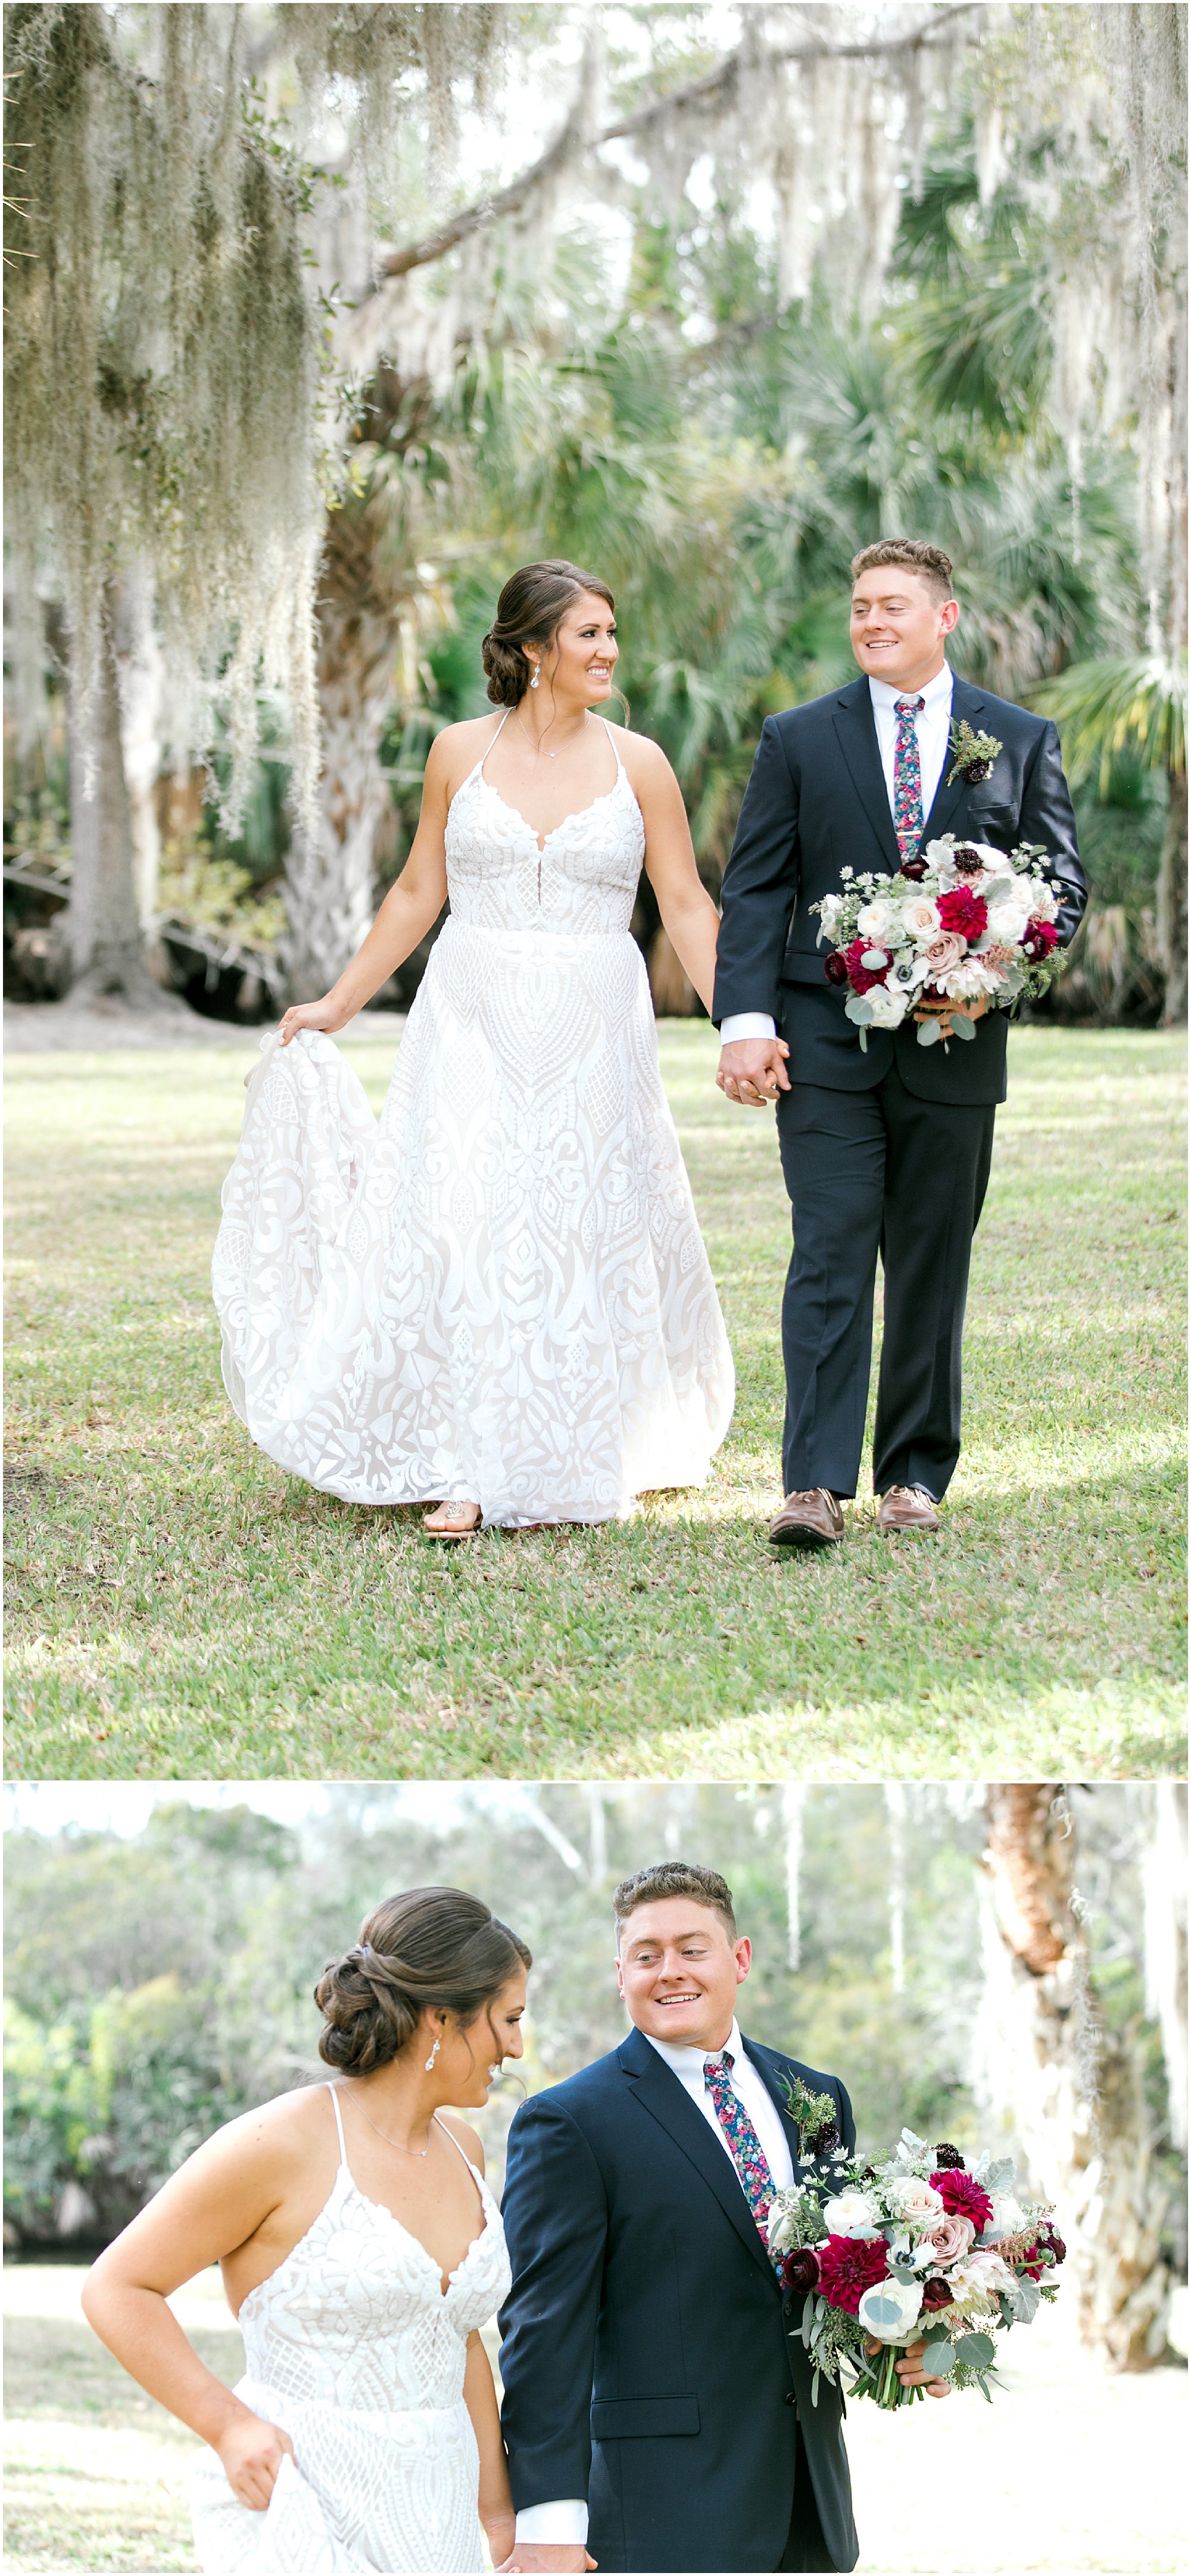 Couple walking and holding hands at their dusty rose and burgundy wedding